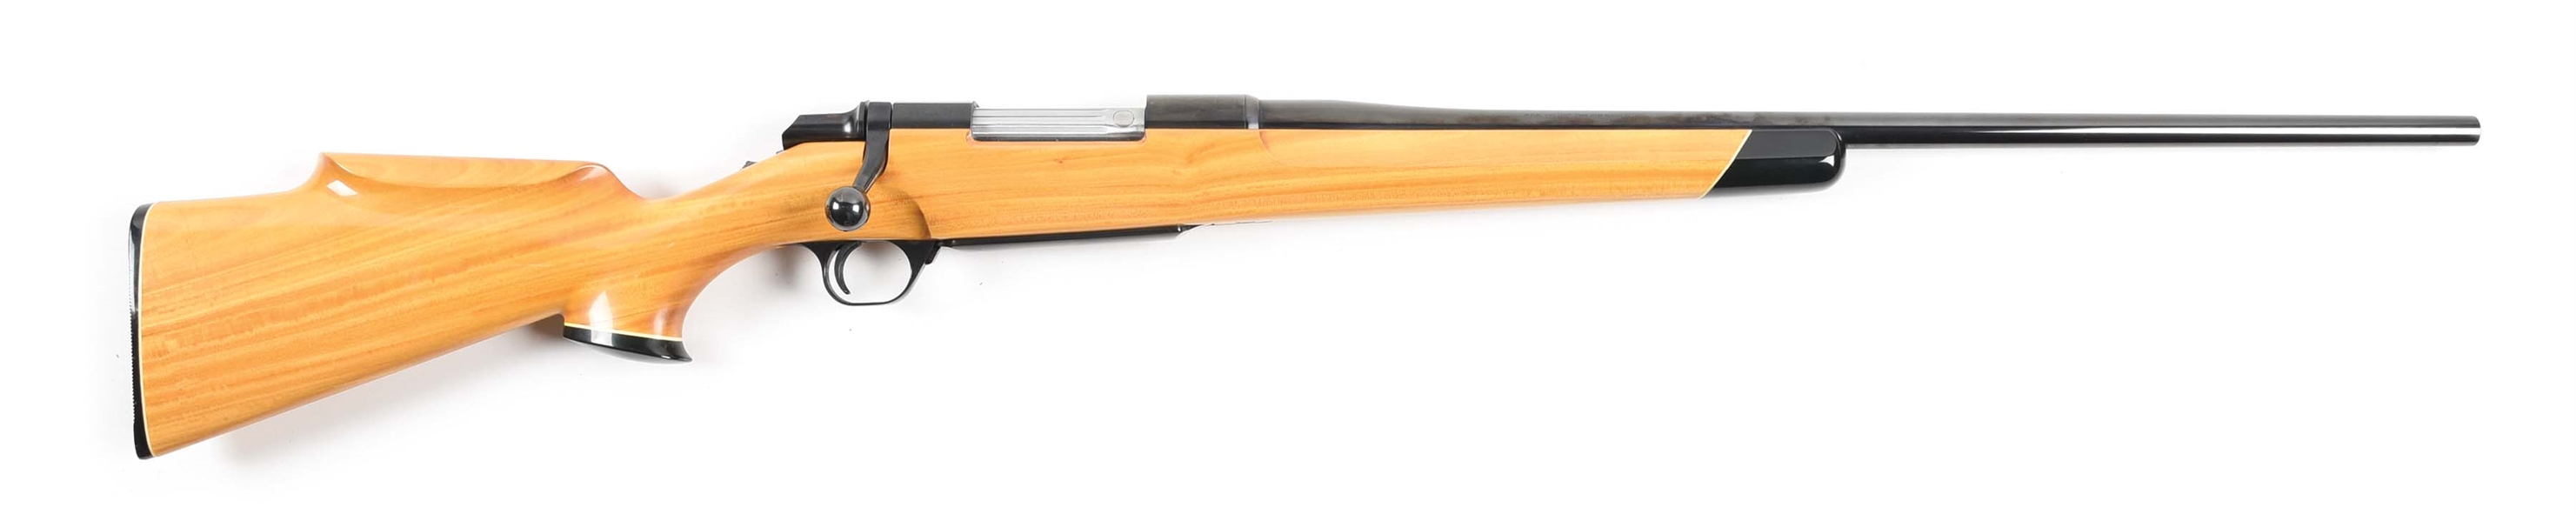 (M) BROWNING BBR BOLT ACTION RIFLE WITH SATIN WOOD STOCK.